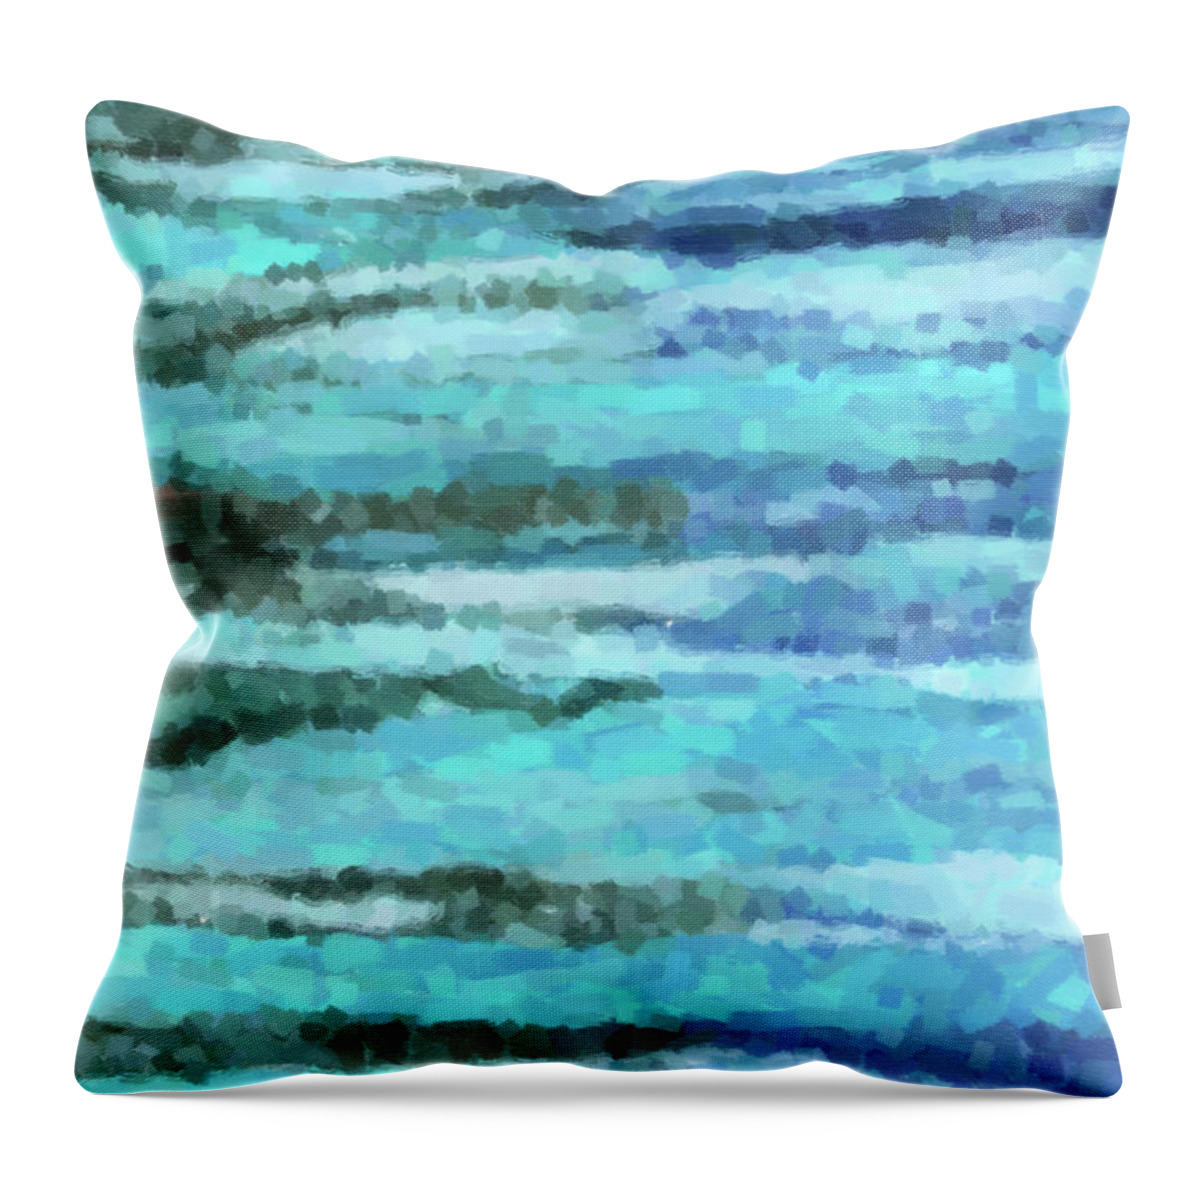 Blue Throw Pillow featuring the painting Blue Ocean by Kathie Miller